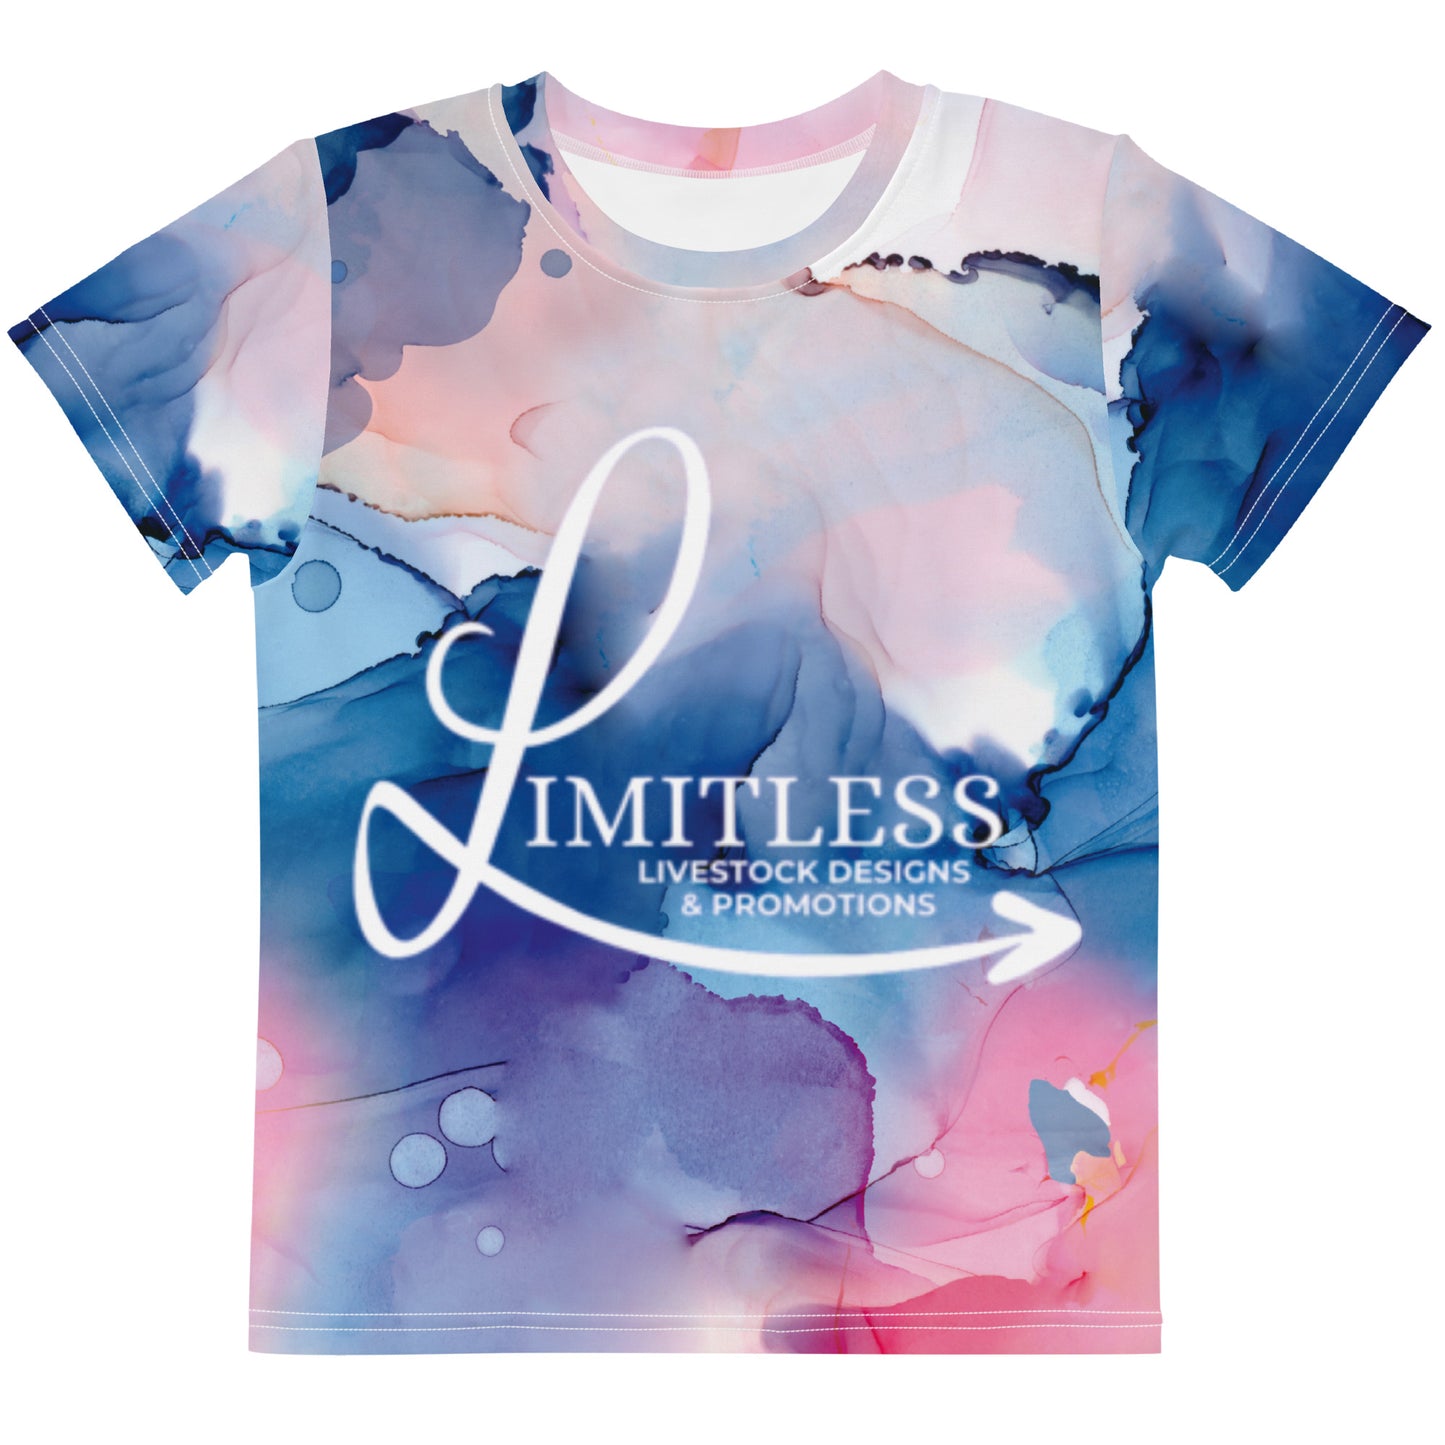 LIMITLESS LIVESTOCK DESIGNS- YOUTH TEE